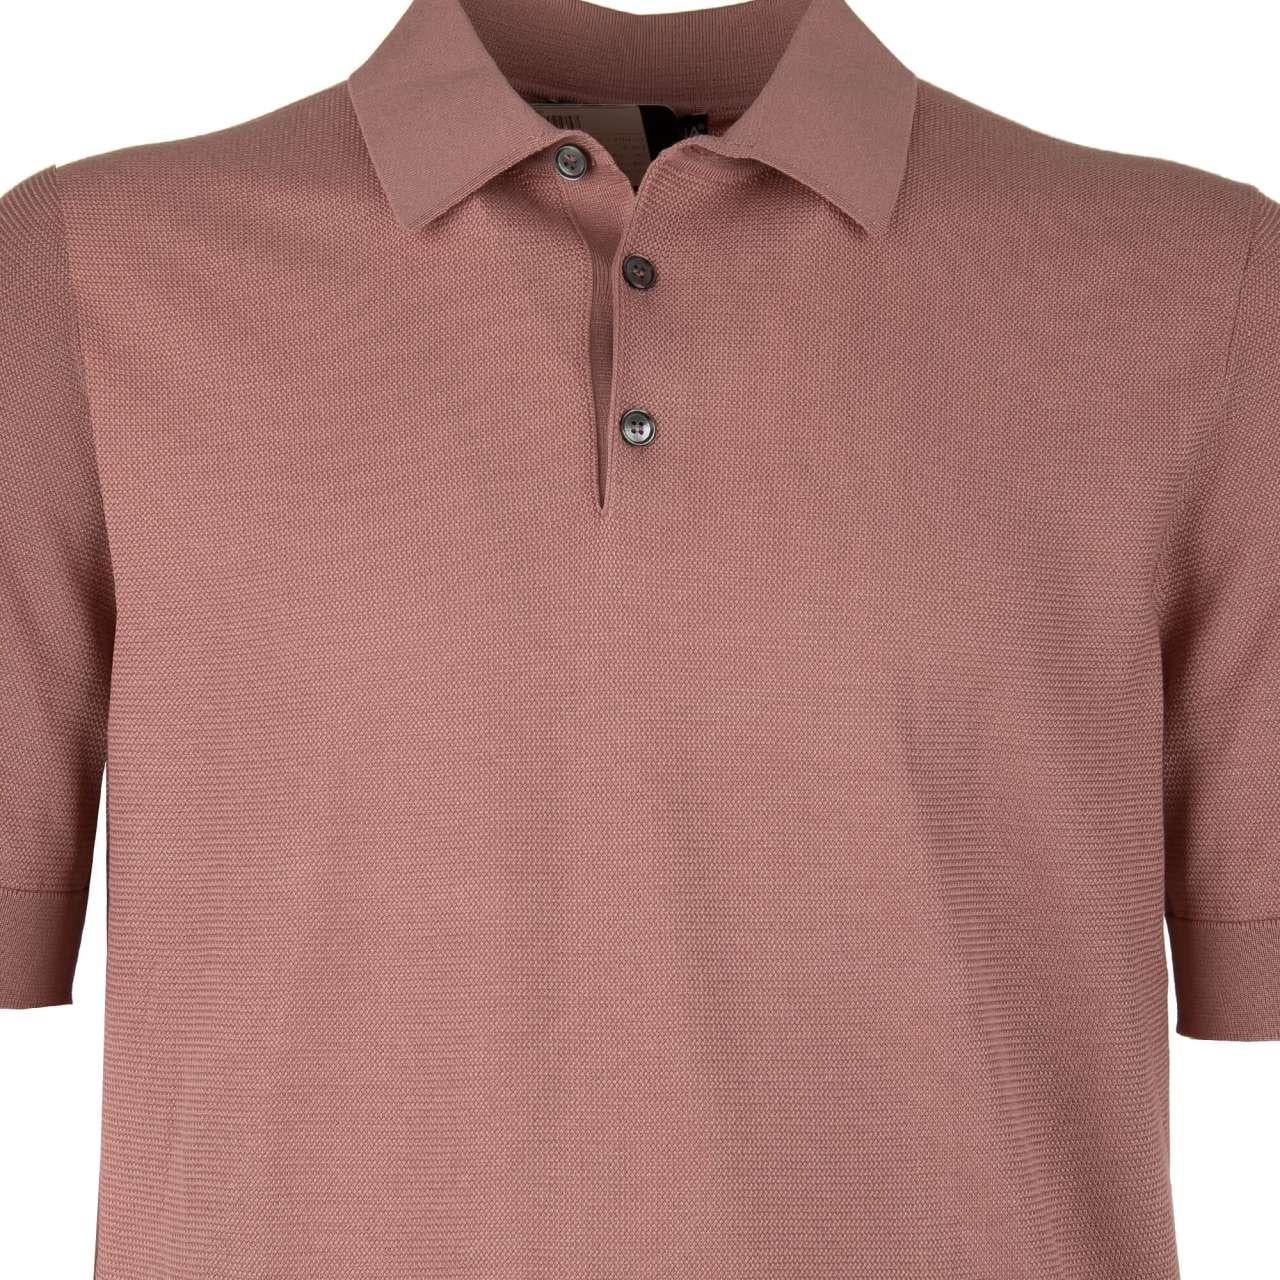 - Silk Polo Shirt with woven structure and pearl buttons in pink by DOLCE & GABBANA - New with Tags - MADE IN ITALY - Slim F- Polo collar - Button closure - Model: GX597T-JASGU-F0052 - Material: 100% Silk - Color: Pink